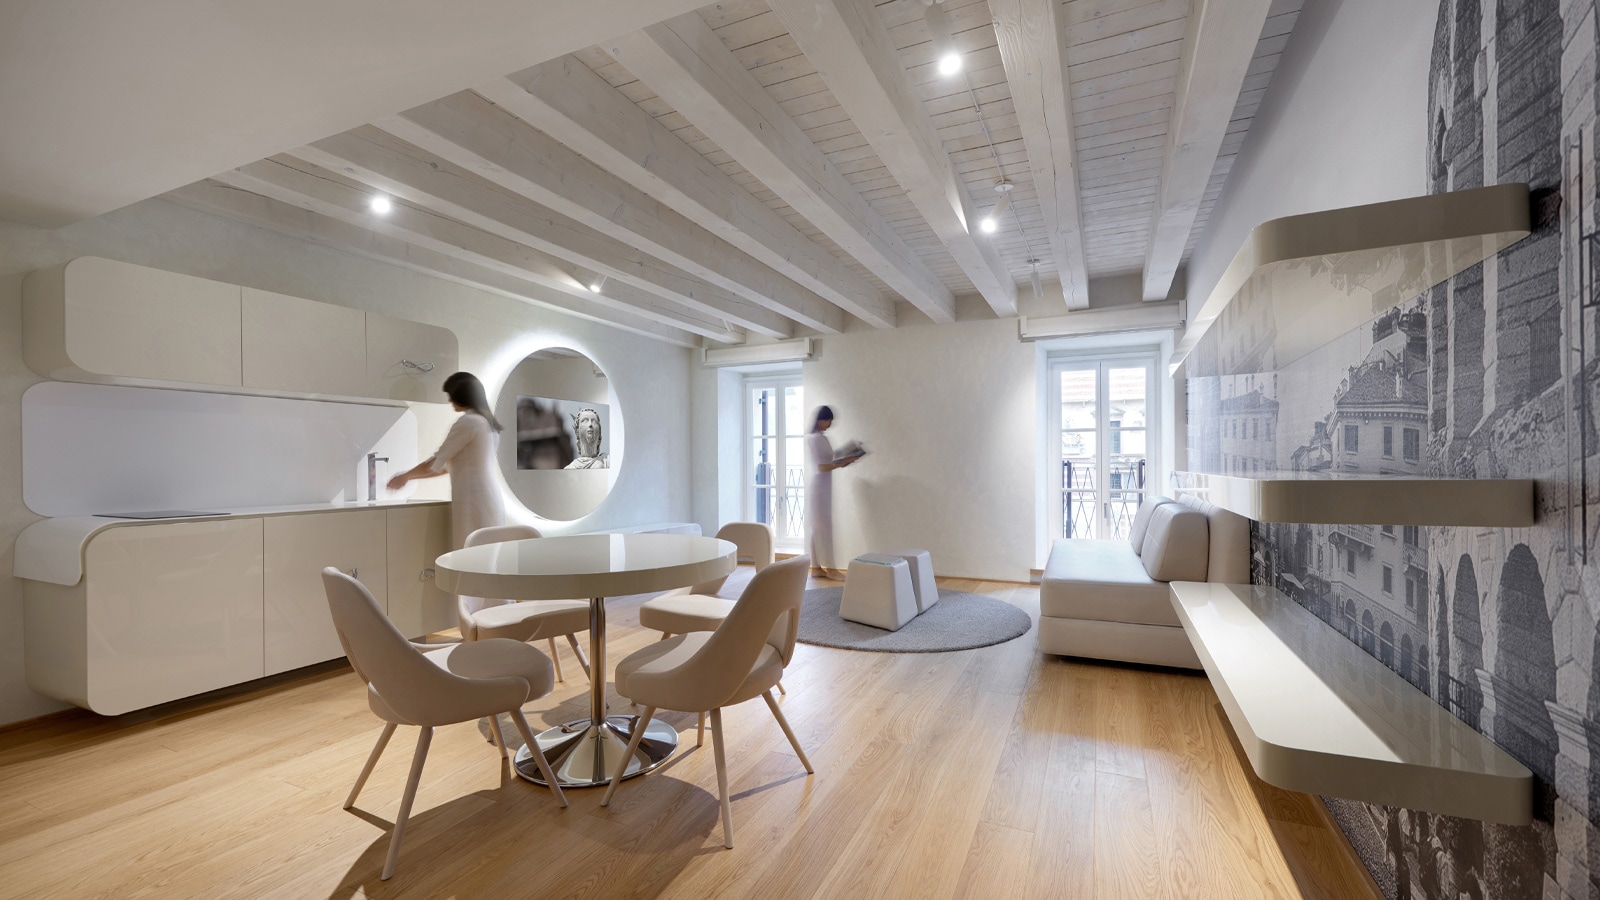 A medieval palazzo renovated with Porcelanosa